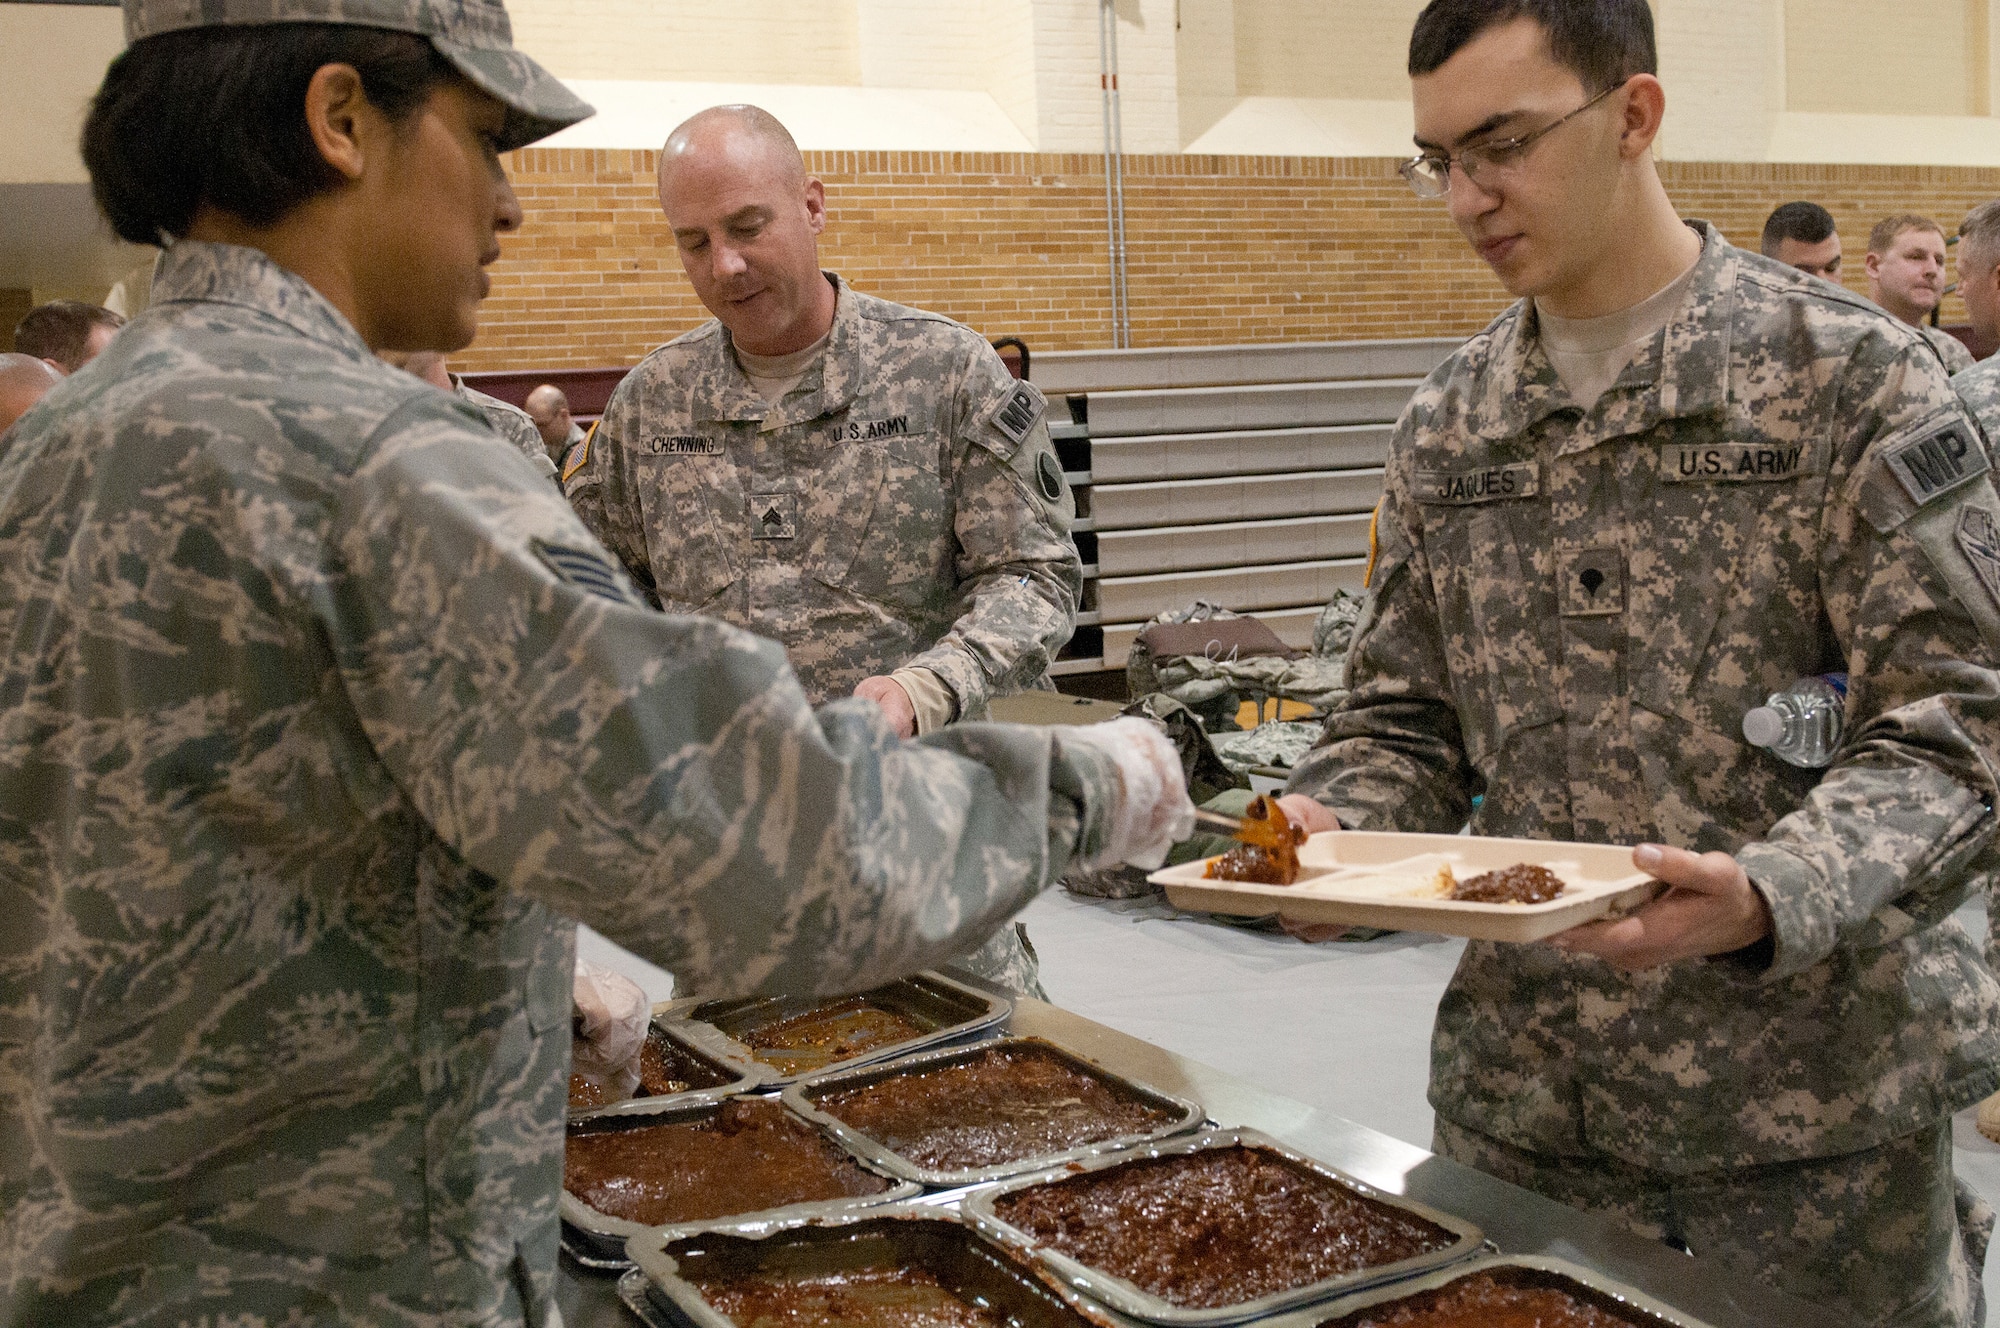 Members of the Kentucky Air National Guard’s 123rd Force Support Squadron serve hot meals to military police and security forces personnel Jan. 19, 2013, at McKinley Technology High School in Washington, D.C., in support of the 57th Presidential Inauguration. Nine members of the Kentucky unit deployed to provide food and lodging services to more than 300 troops. (Kentucky Air National Guard photo by Senior Airman Vicky Spesard)